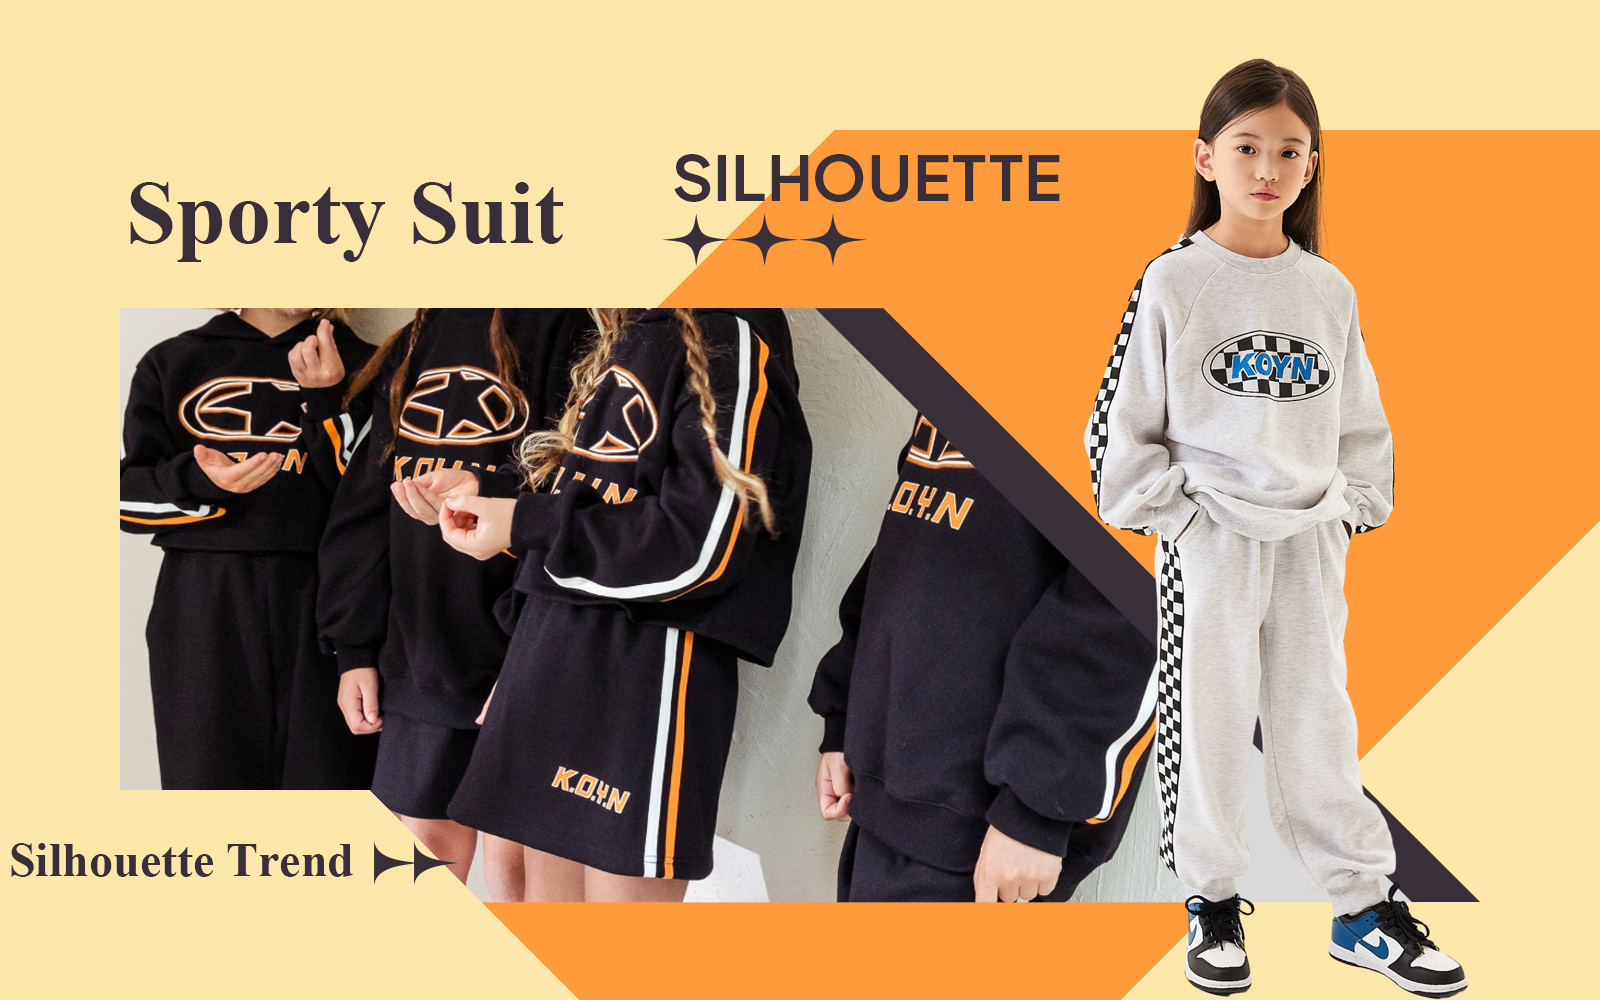 The Silhouette Trend for Kids' Sporty Suit